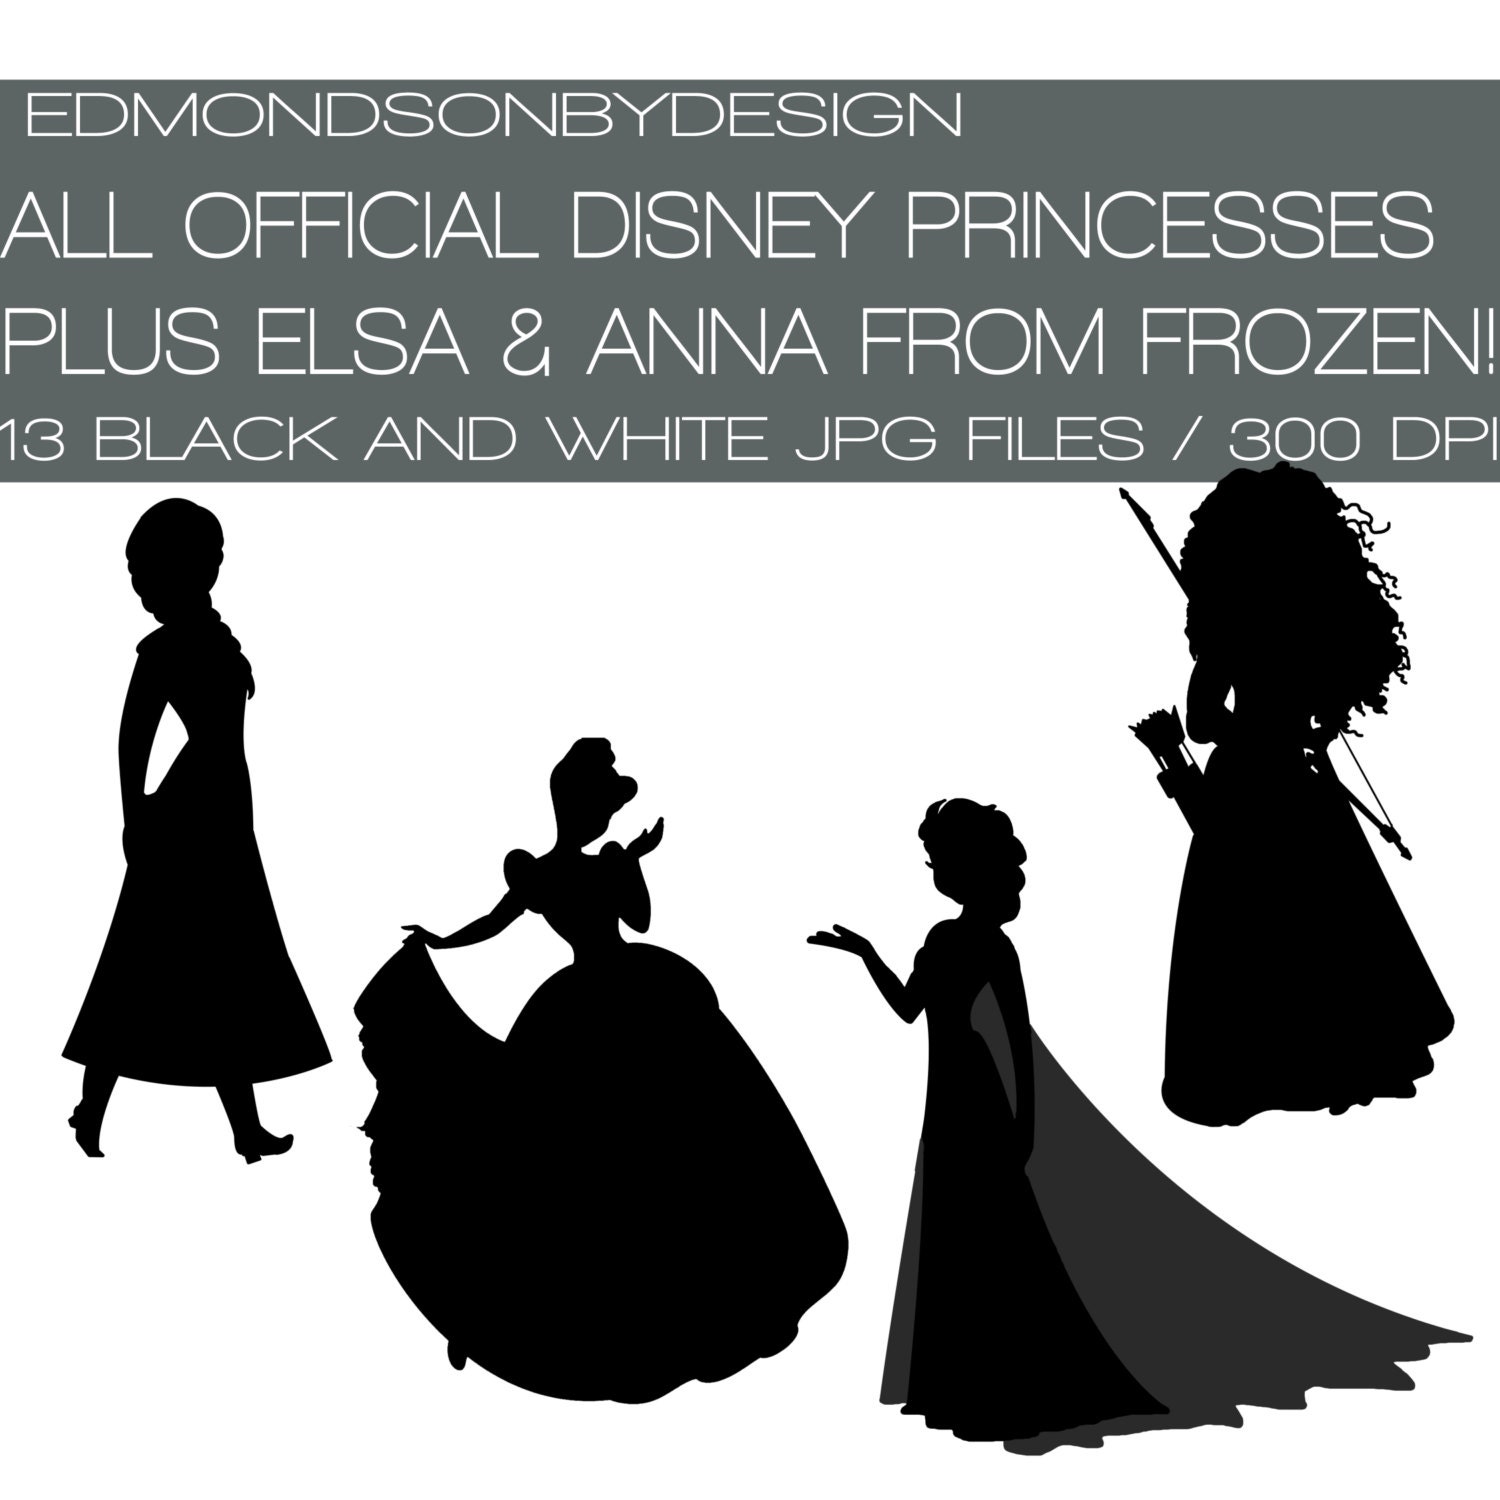 Download Disney Princess Silhouette JPG Black and White Clip Art Icons